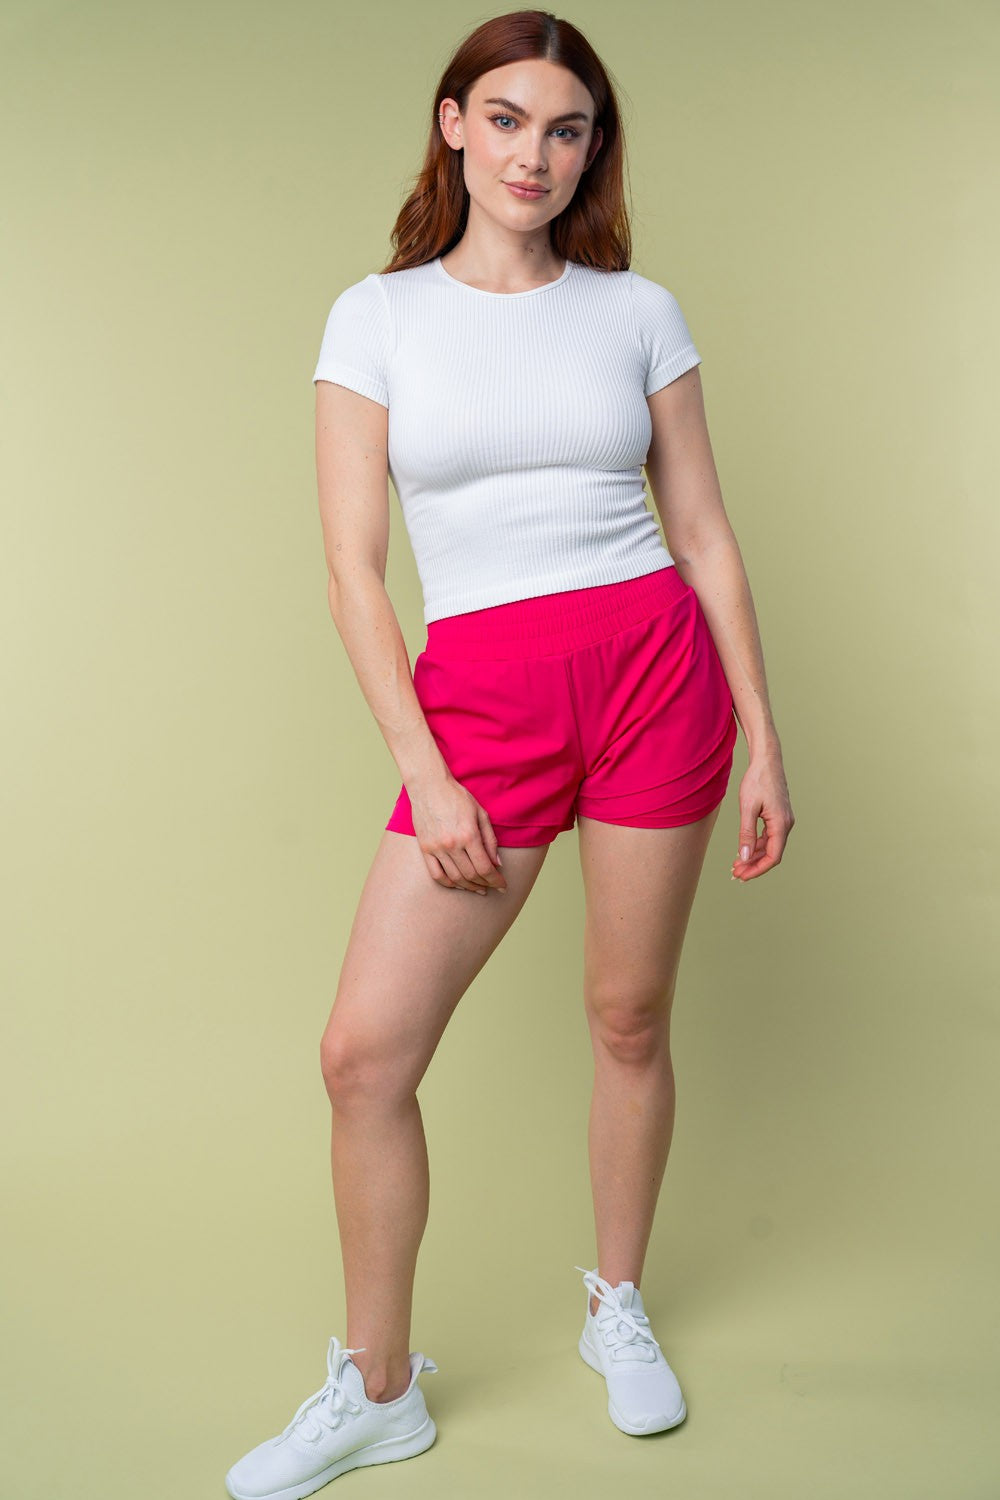 More Action High Waisted Knit Shorts in Pink